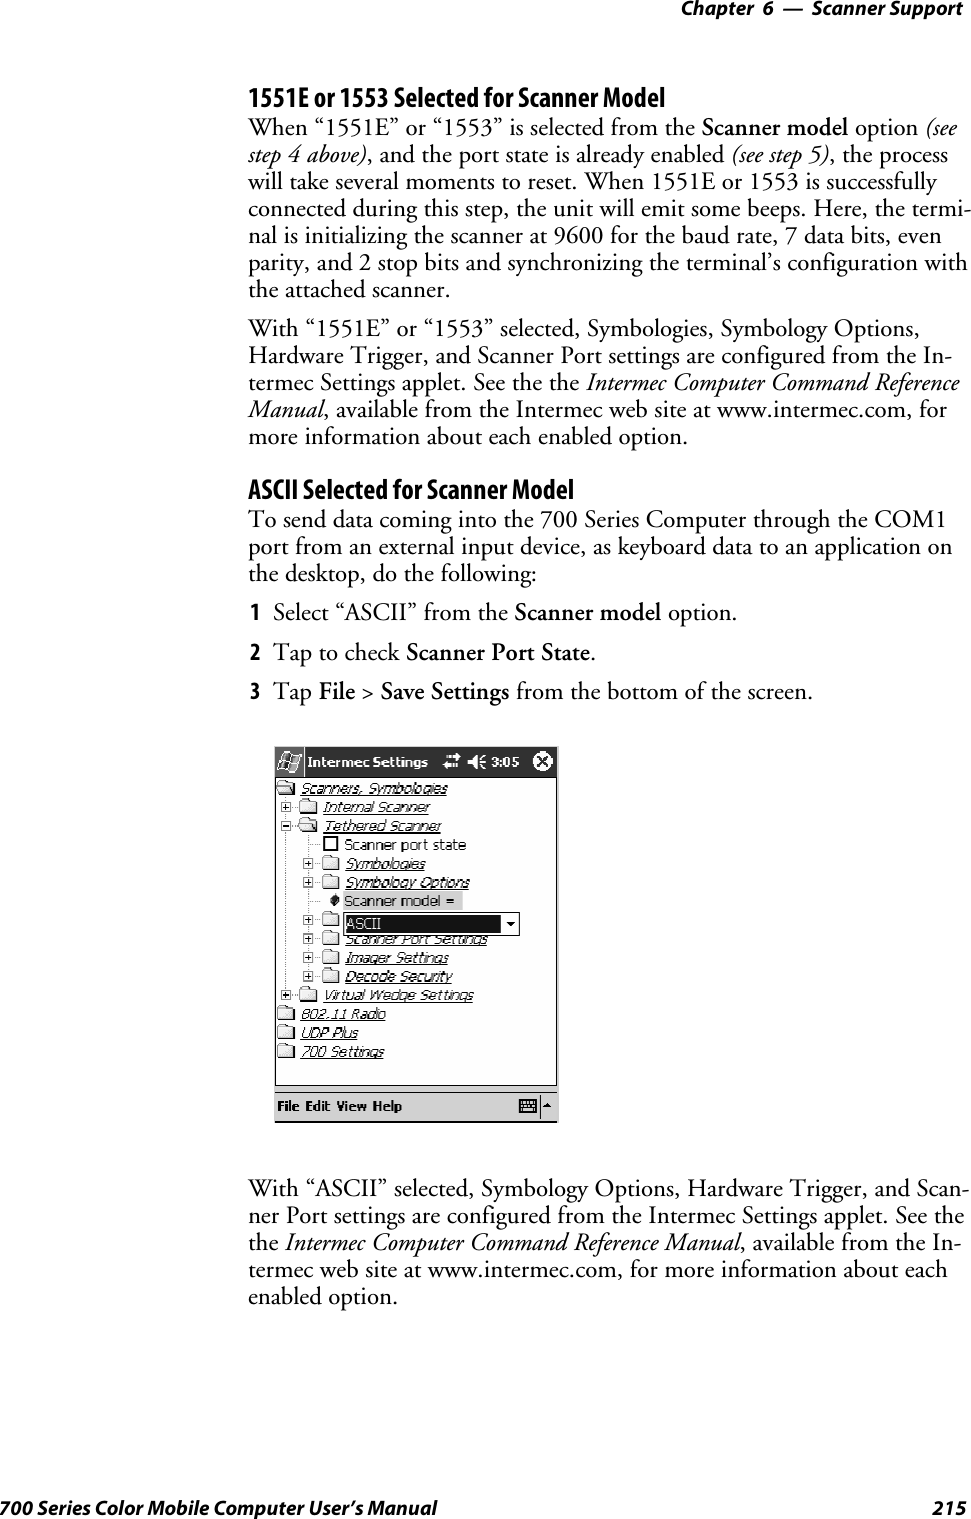 6 Scanner Support—Chapter215700 Series Color Mobile Computer User’s Manual1551E or 1553 Selected for Scanner ModelWhen “1551E” or “1553” is selected from the Scanner model option (seestep 4 above), and the port state is already enabled (see step 5),theprocesswill take several moments to reset. When 1551E or 1553 is successfullyconnected during this step, the unit will emit some beeps. Here, the termi-nal is initializing the scanner at 9600 for the baud rate, 7 data bits, evenparity, and 2 stop bits and synchronizing the terminal’s configuration withthe attached scanner.With “1551E” or “1553” selected, Symbologies, Symbology Options,Hardware Trigger, and Scanner Port settings are configured from the In-termec Settings applet. See the the Intermec Computer Command ReferenceManual, available from the Intermec web site at www.intermec.com, formore information about each enabled option.ASCII Selected for Scanner ModelTo send data coming into the 700 Series Computer through the COM1port from an external input device, as keyboard data to an application onthe desktop, do the following:1Select “ASCII” from the Scanner model option.2Tap to check Scanner Port State.3Tap File &gt;Save Settings from the bottom of the screen.With “ASCII” selected, Symbology Options, Hardware Trigger, and Scan-ner Port settings are configured from the Intermec Settings applet. See thethe Intermec Computer Command Reference Manual,availablefromtheIn-termec web site at www.intermec.com, for more information about eachenabled option.